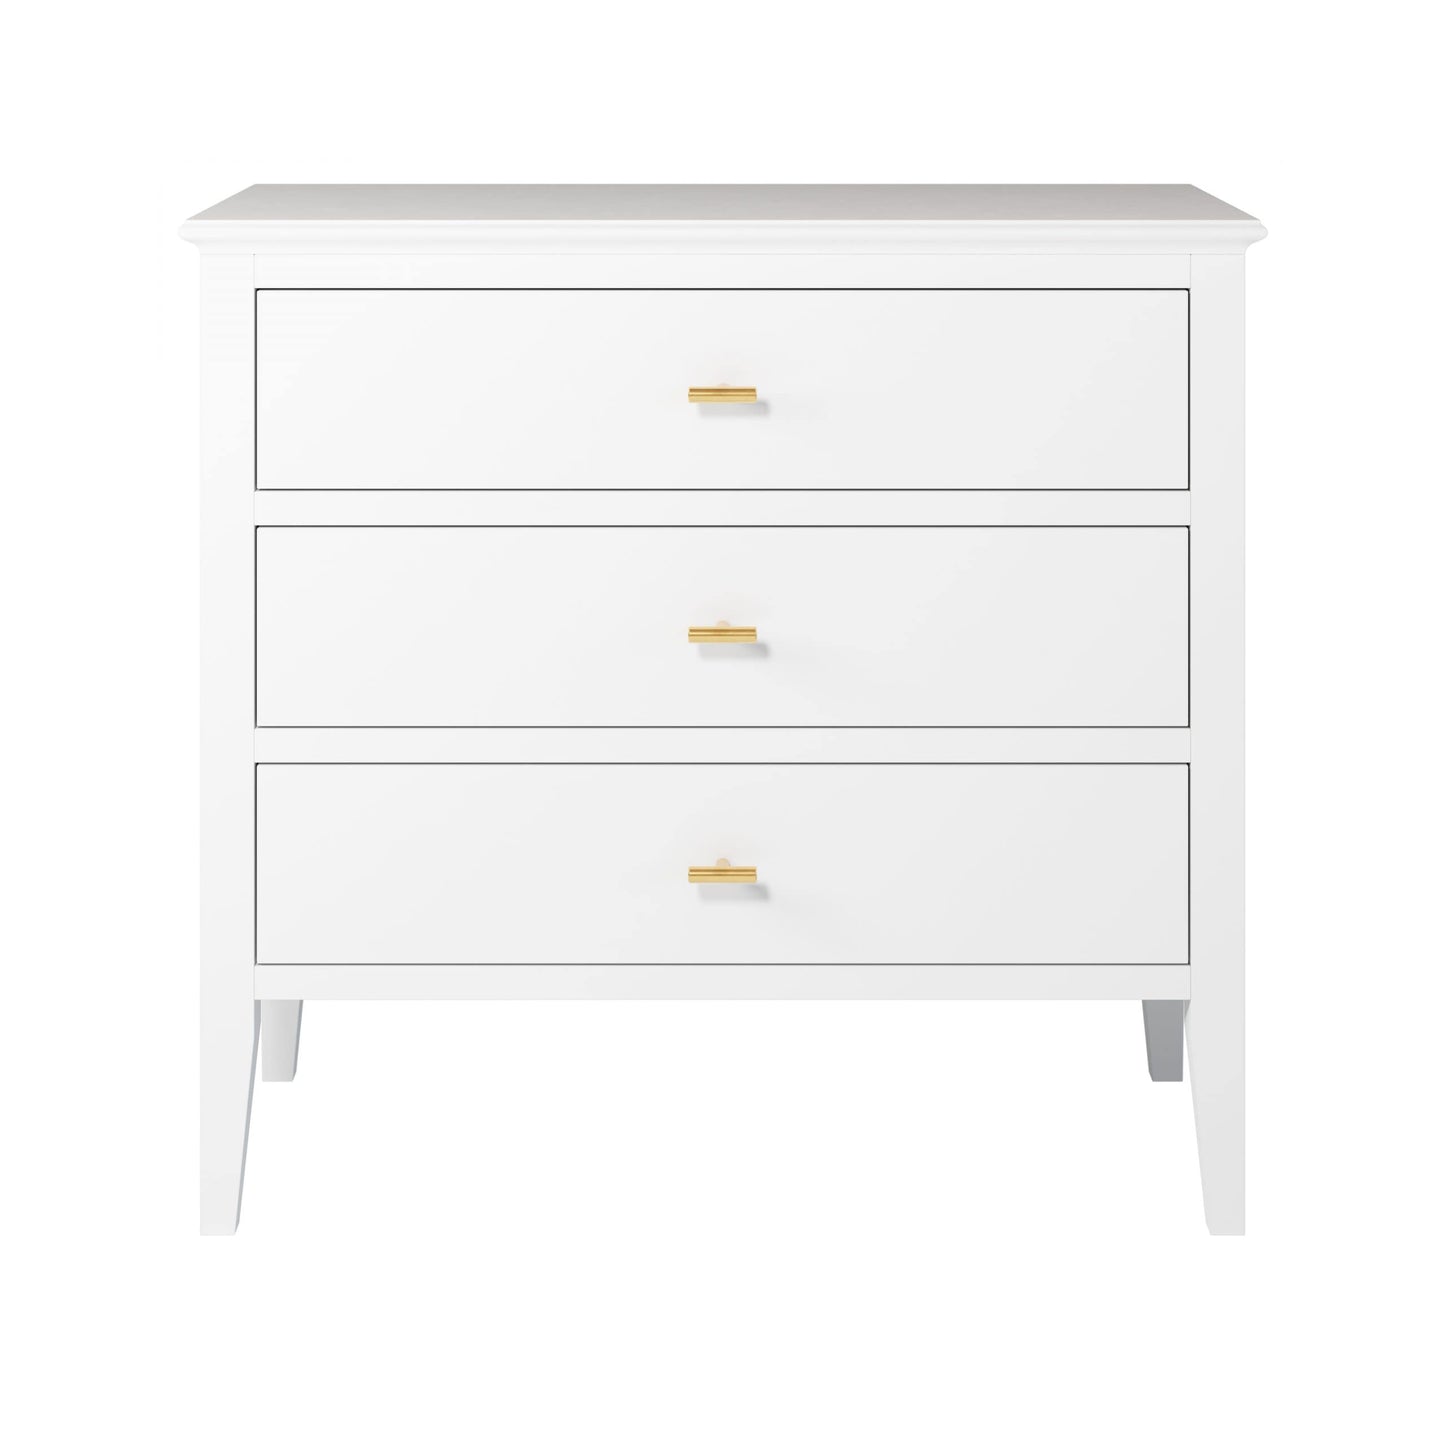 White Chilworth Chest of Drawers